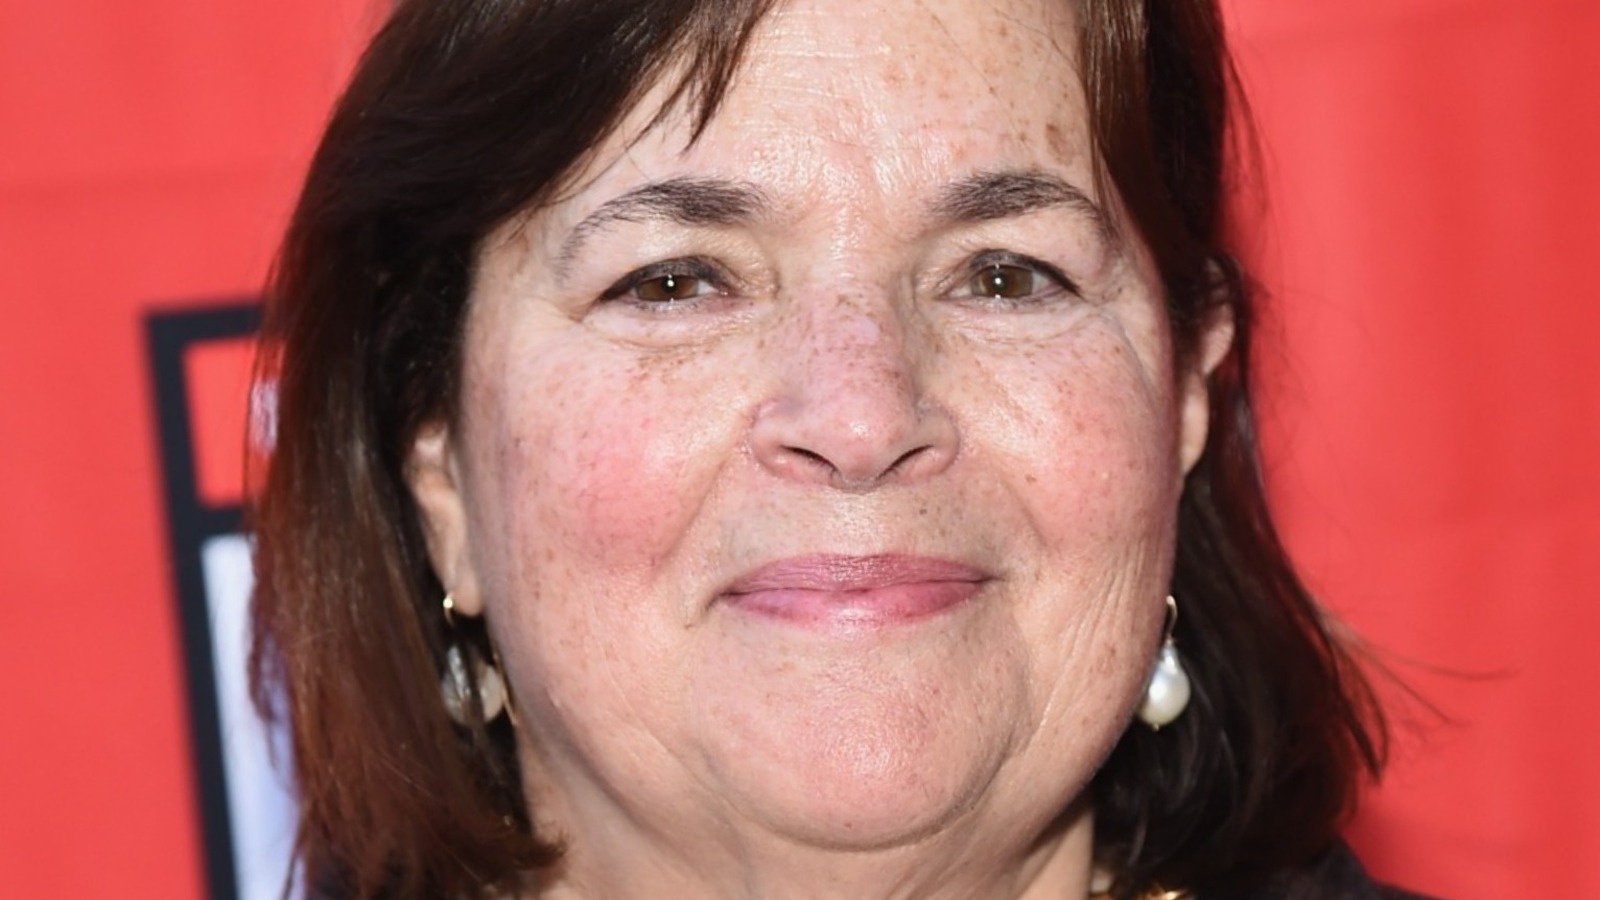 How Does Ina Garten Fit Into The 'Coastal Grandmother' TikTok Aesthetic?